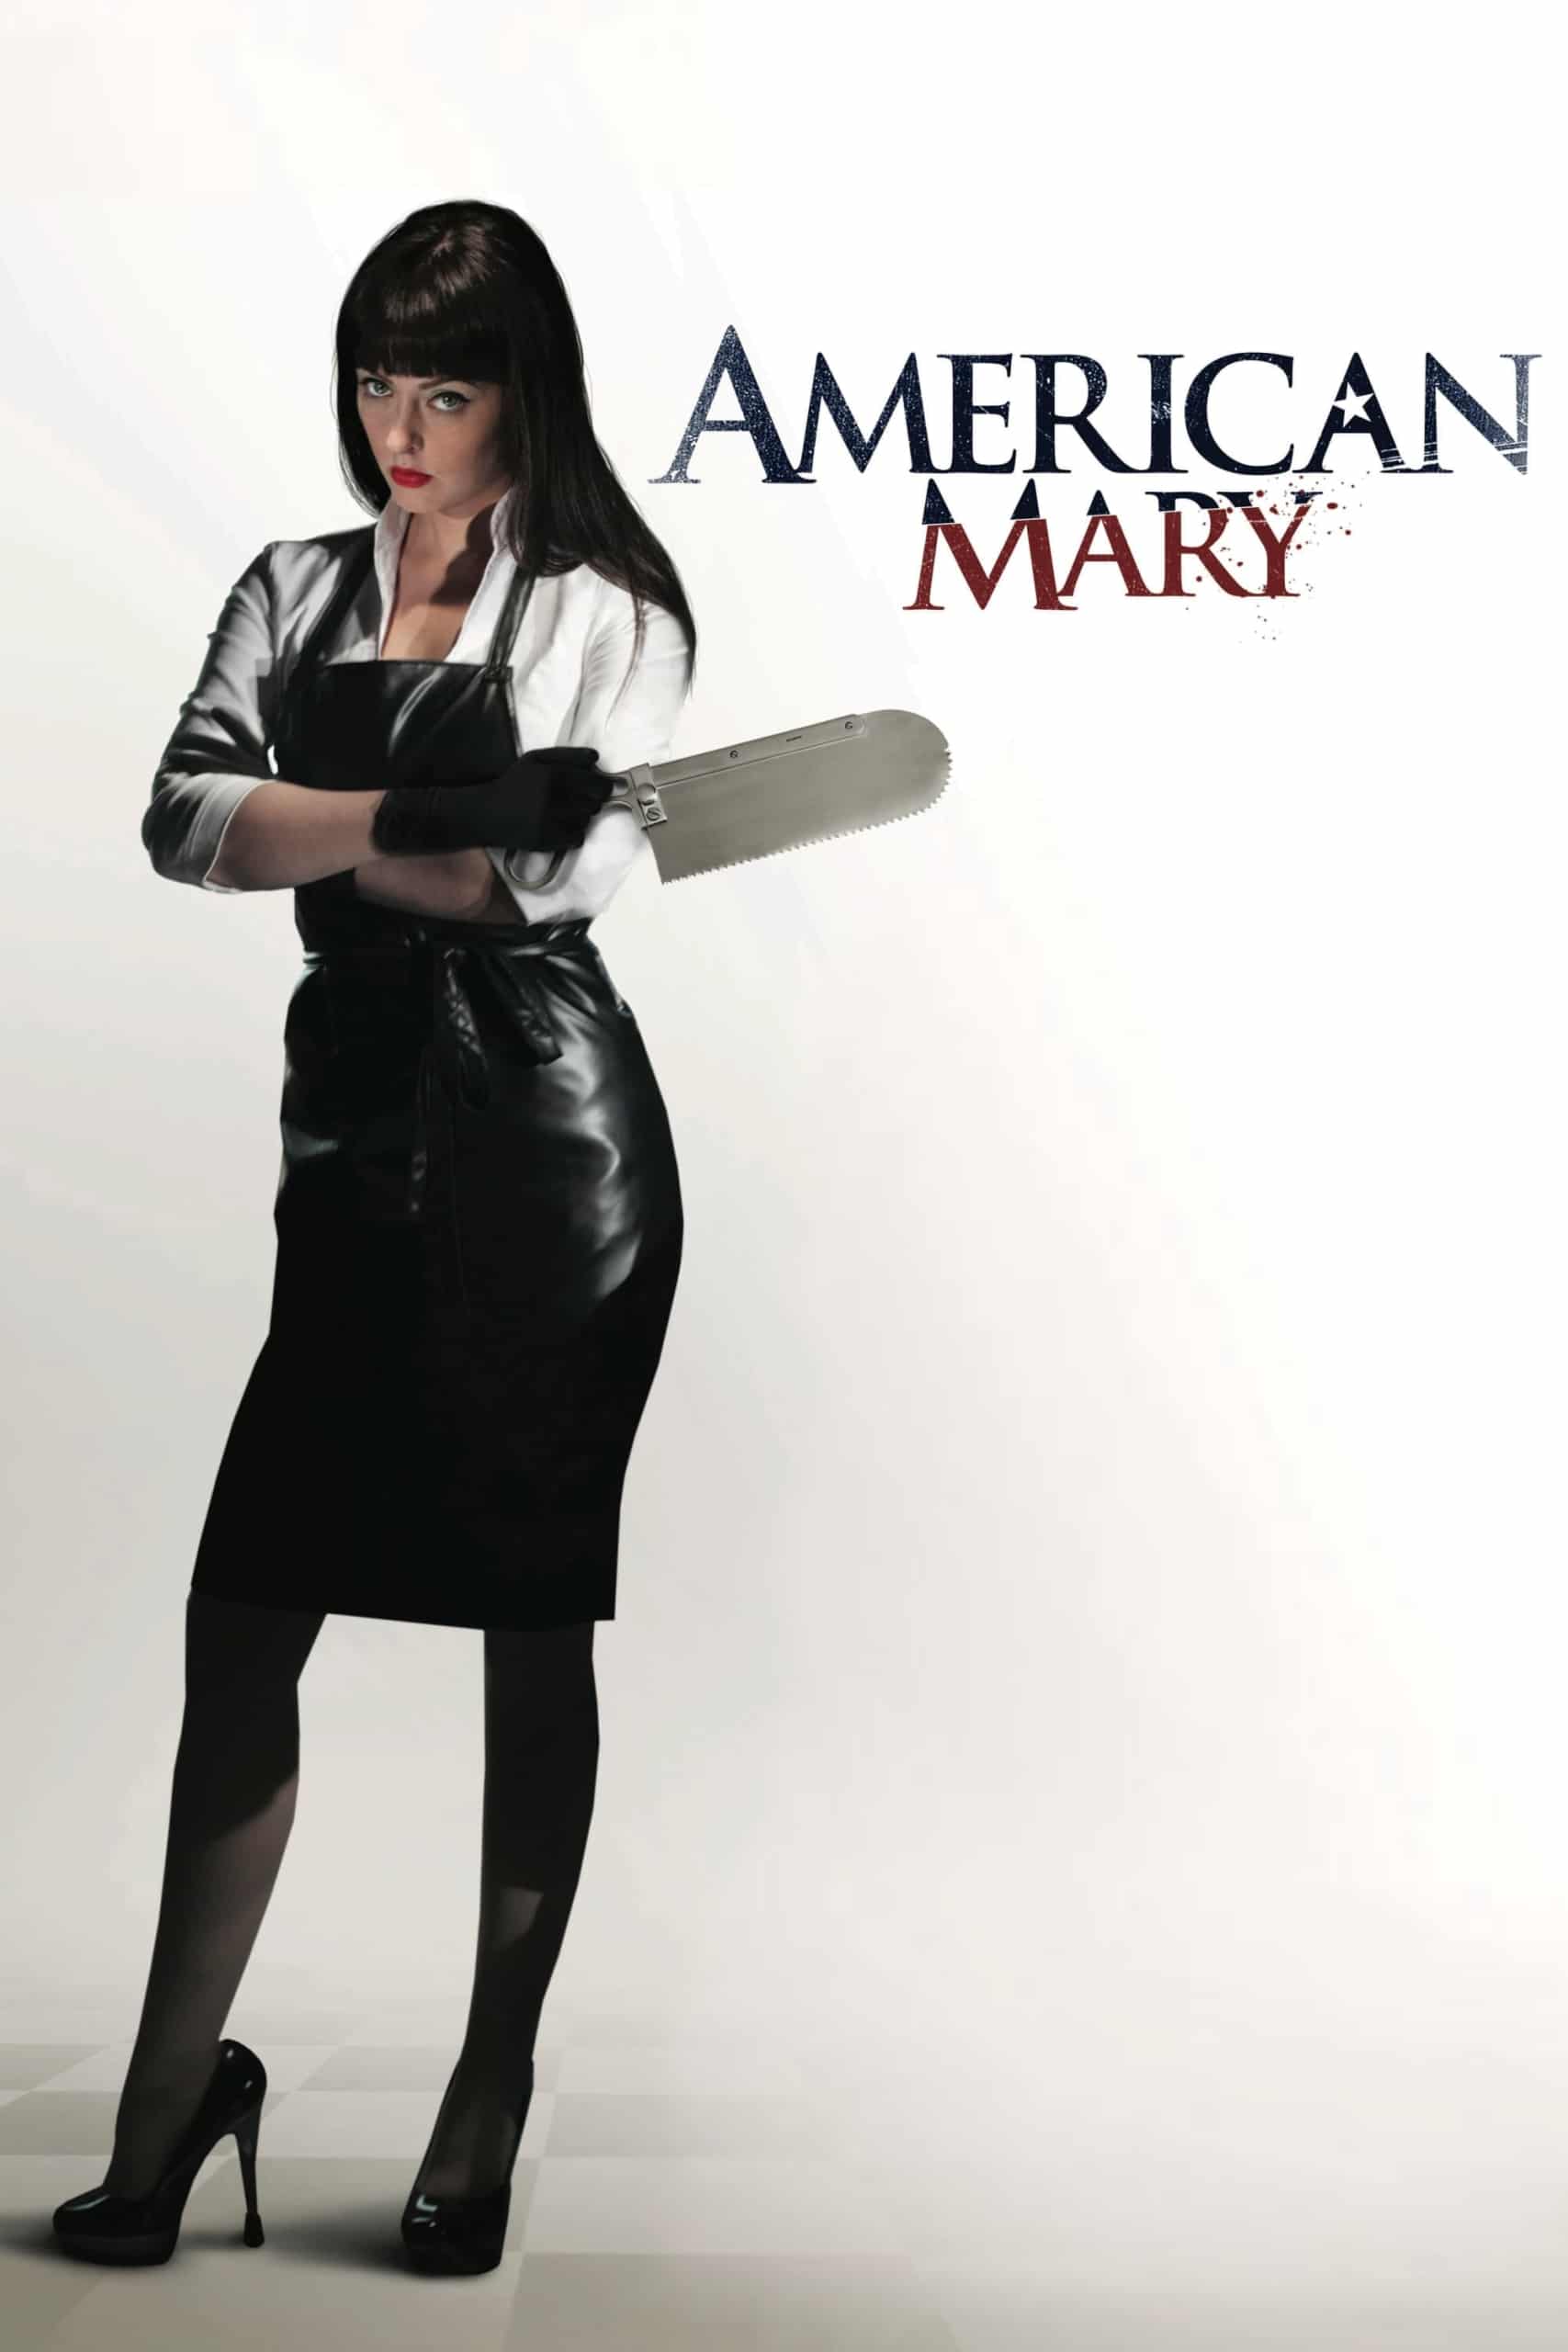 Poster for the movie "American Mary"